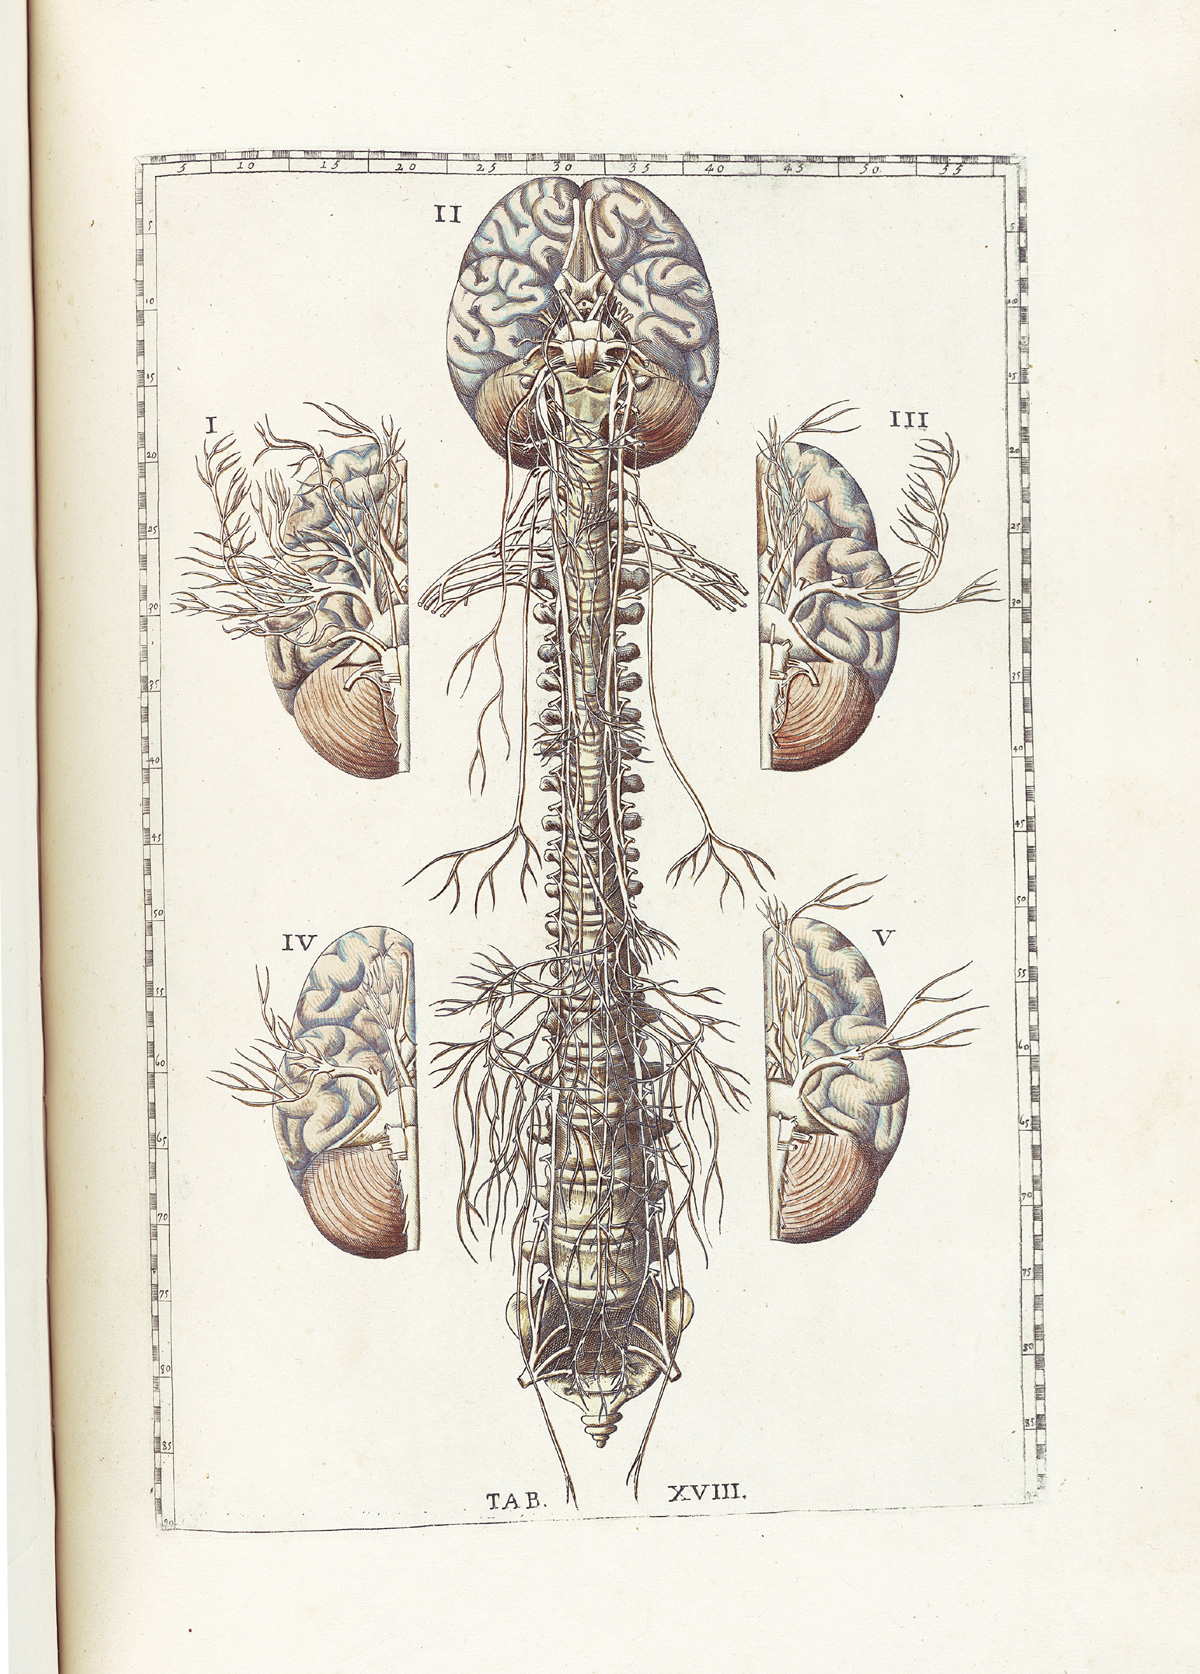 Hand-colored etching of the brain and spinal cord in the center of the image with particular emphasis on where nerves come out of the spinal column to enervate the rest of the body, with two brains divided in two on either side with emphasis on the cranial nerves and where they come out of the brain; from Bartholomeo Eustachi’s Tabulae anatomicae, NLM Call no.: WZ 260 E87t 1783.